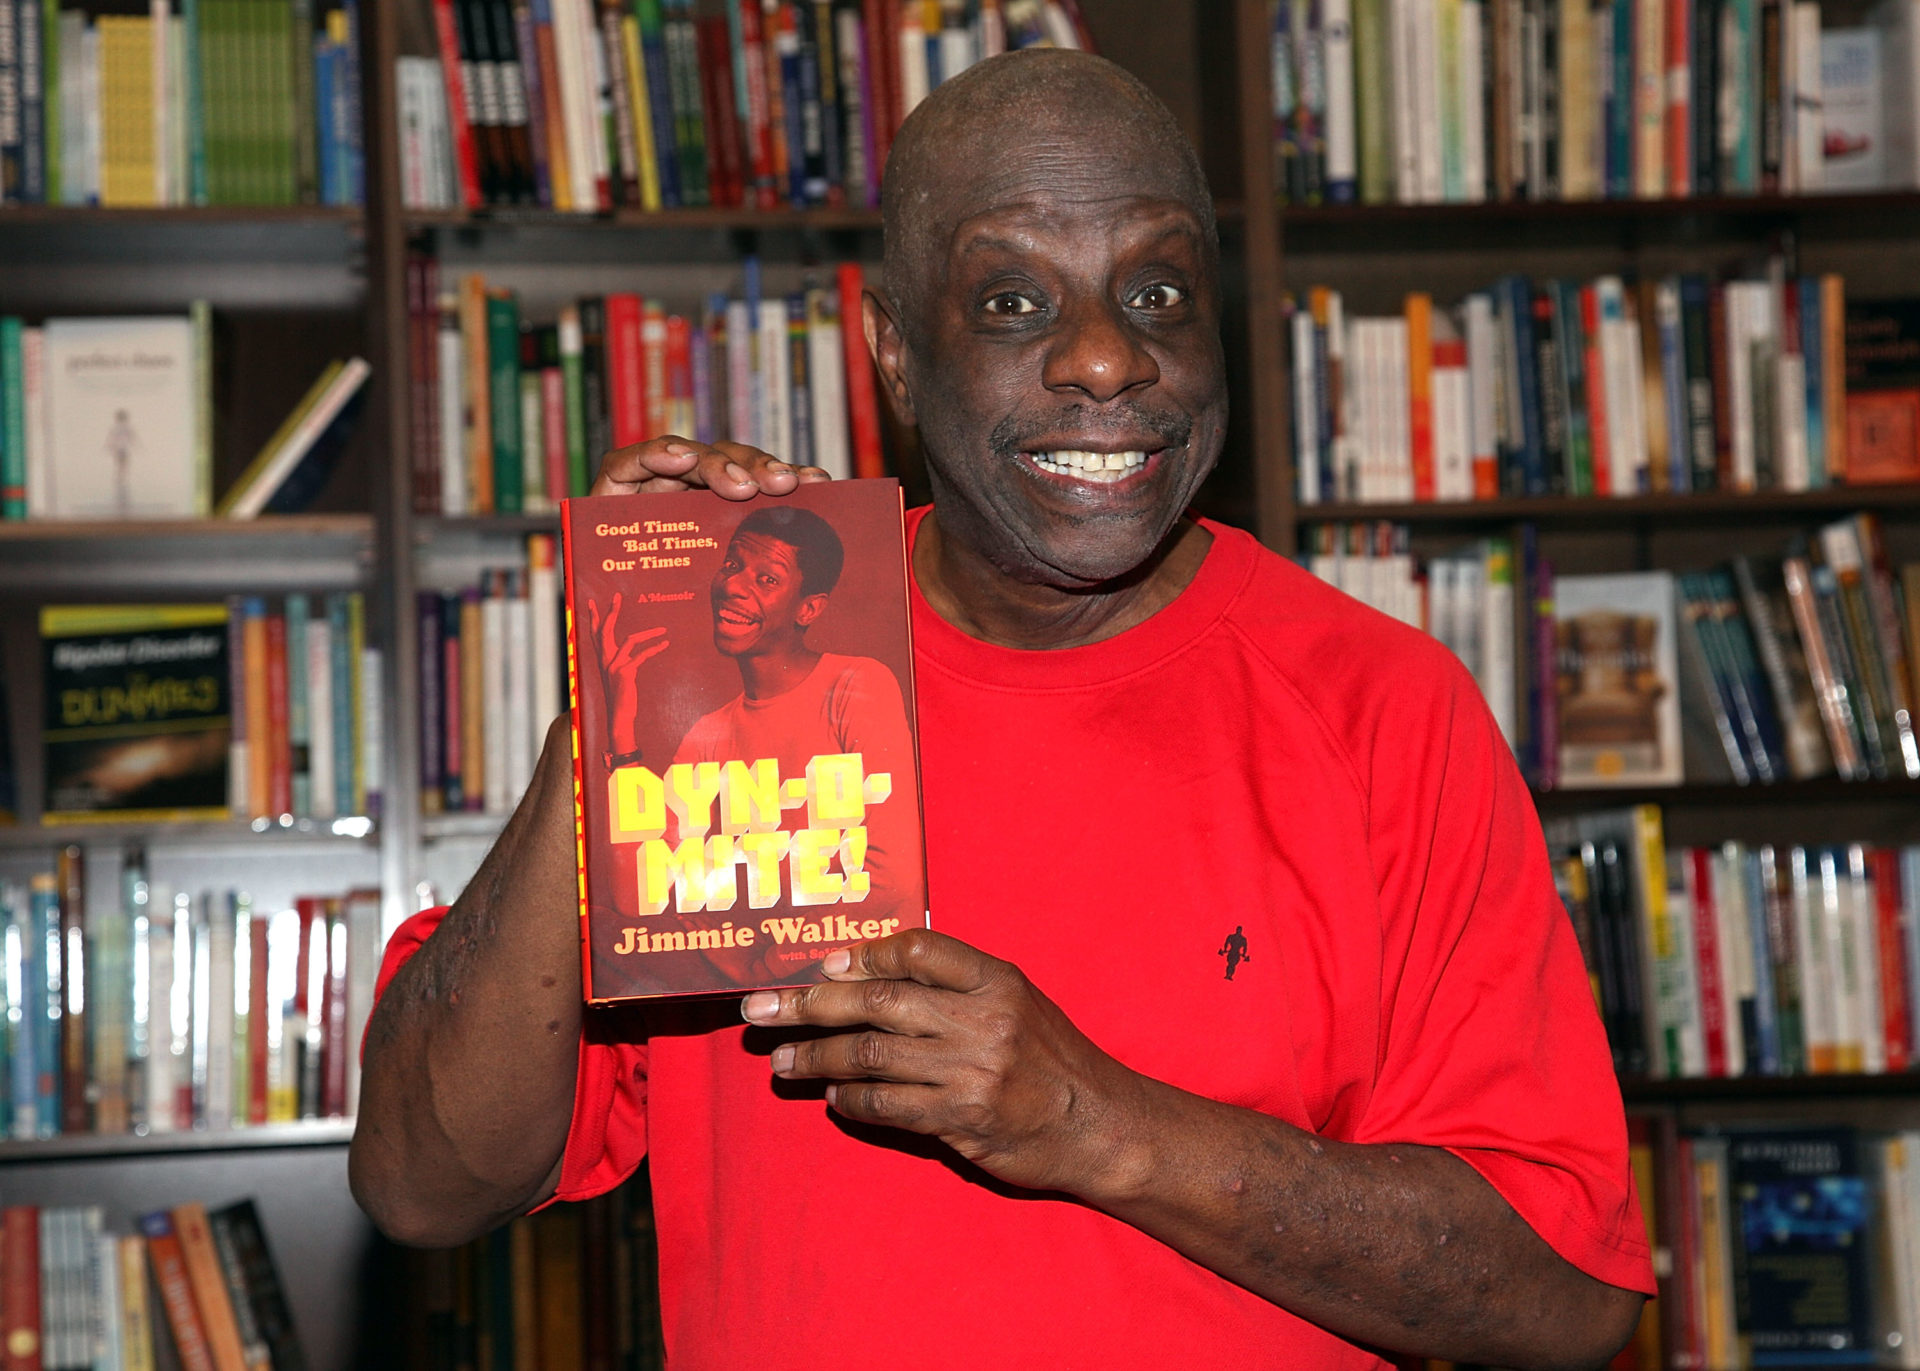 Jimmie Walker Signs Copies Of "Dynomite!: Good Times, Bad Times' Our Times - A Memoir"